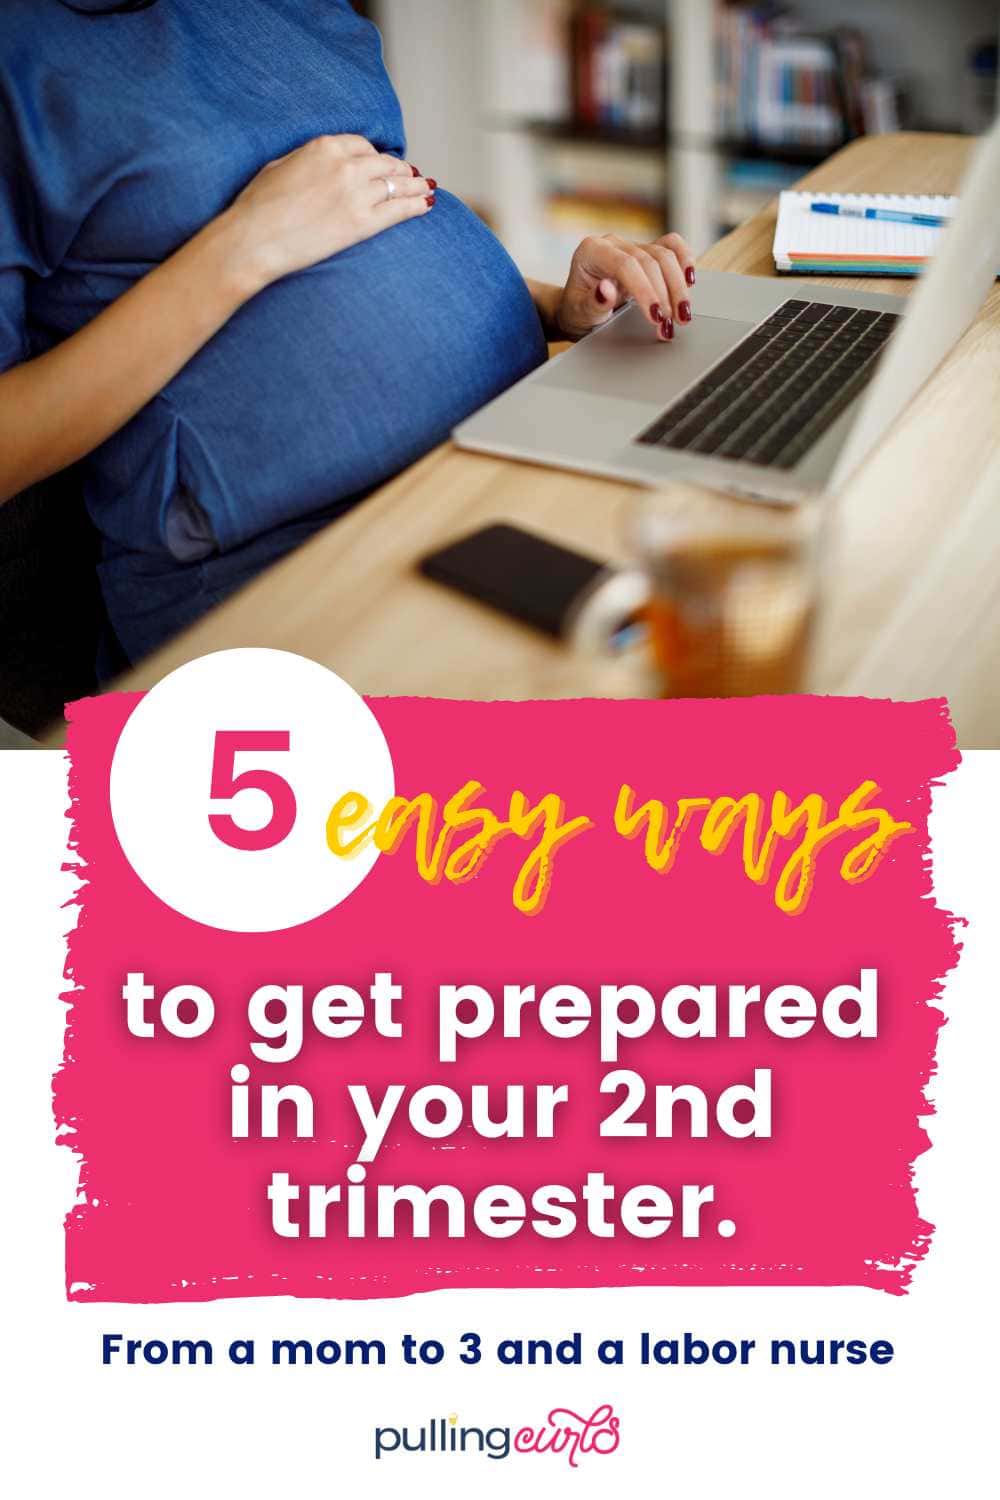 pregnant woman typing on a laptop // 5 easy ways to get prepared in your 2nd trimester via @pullingcurls